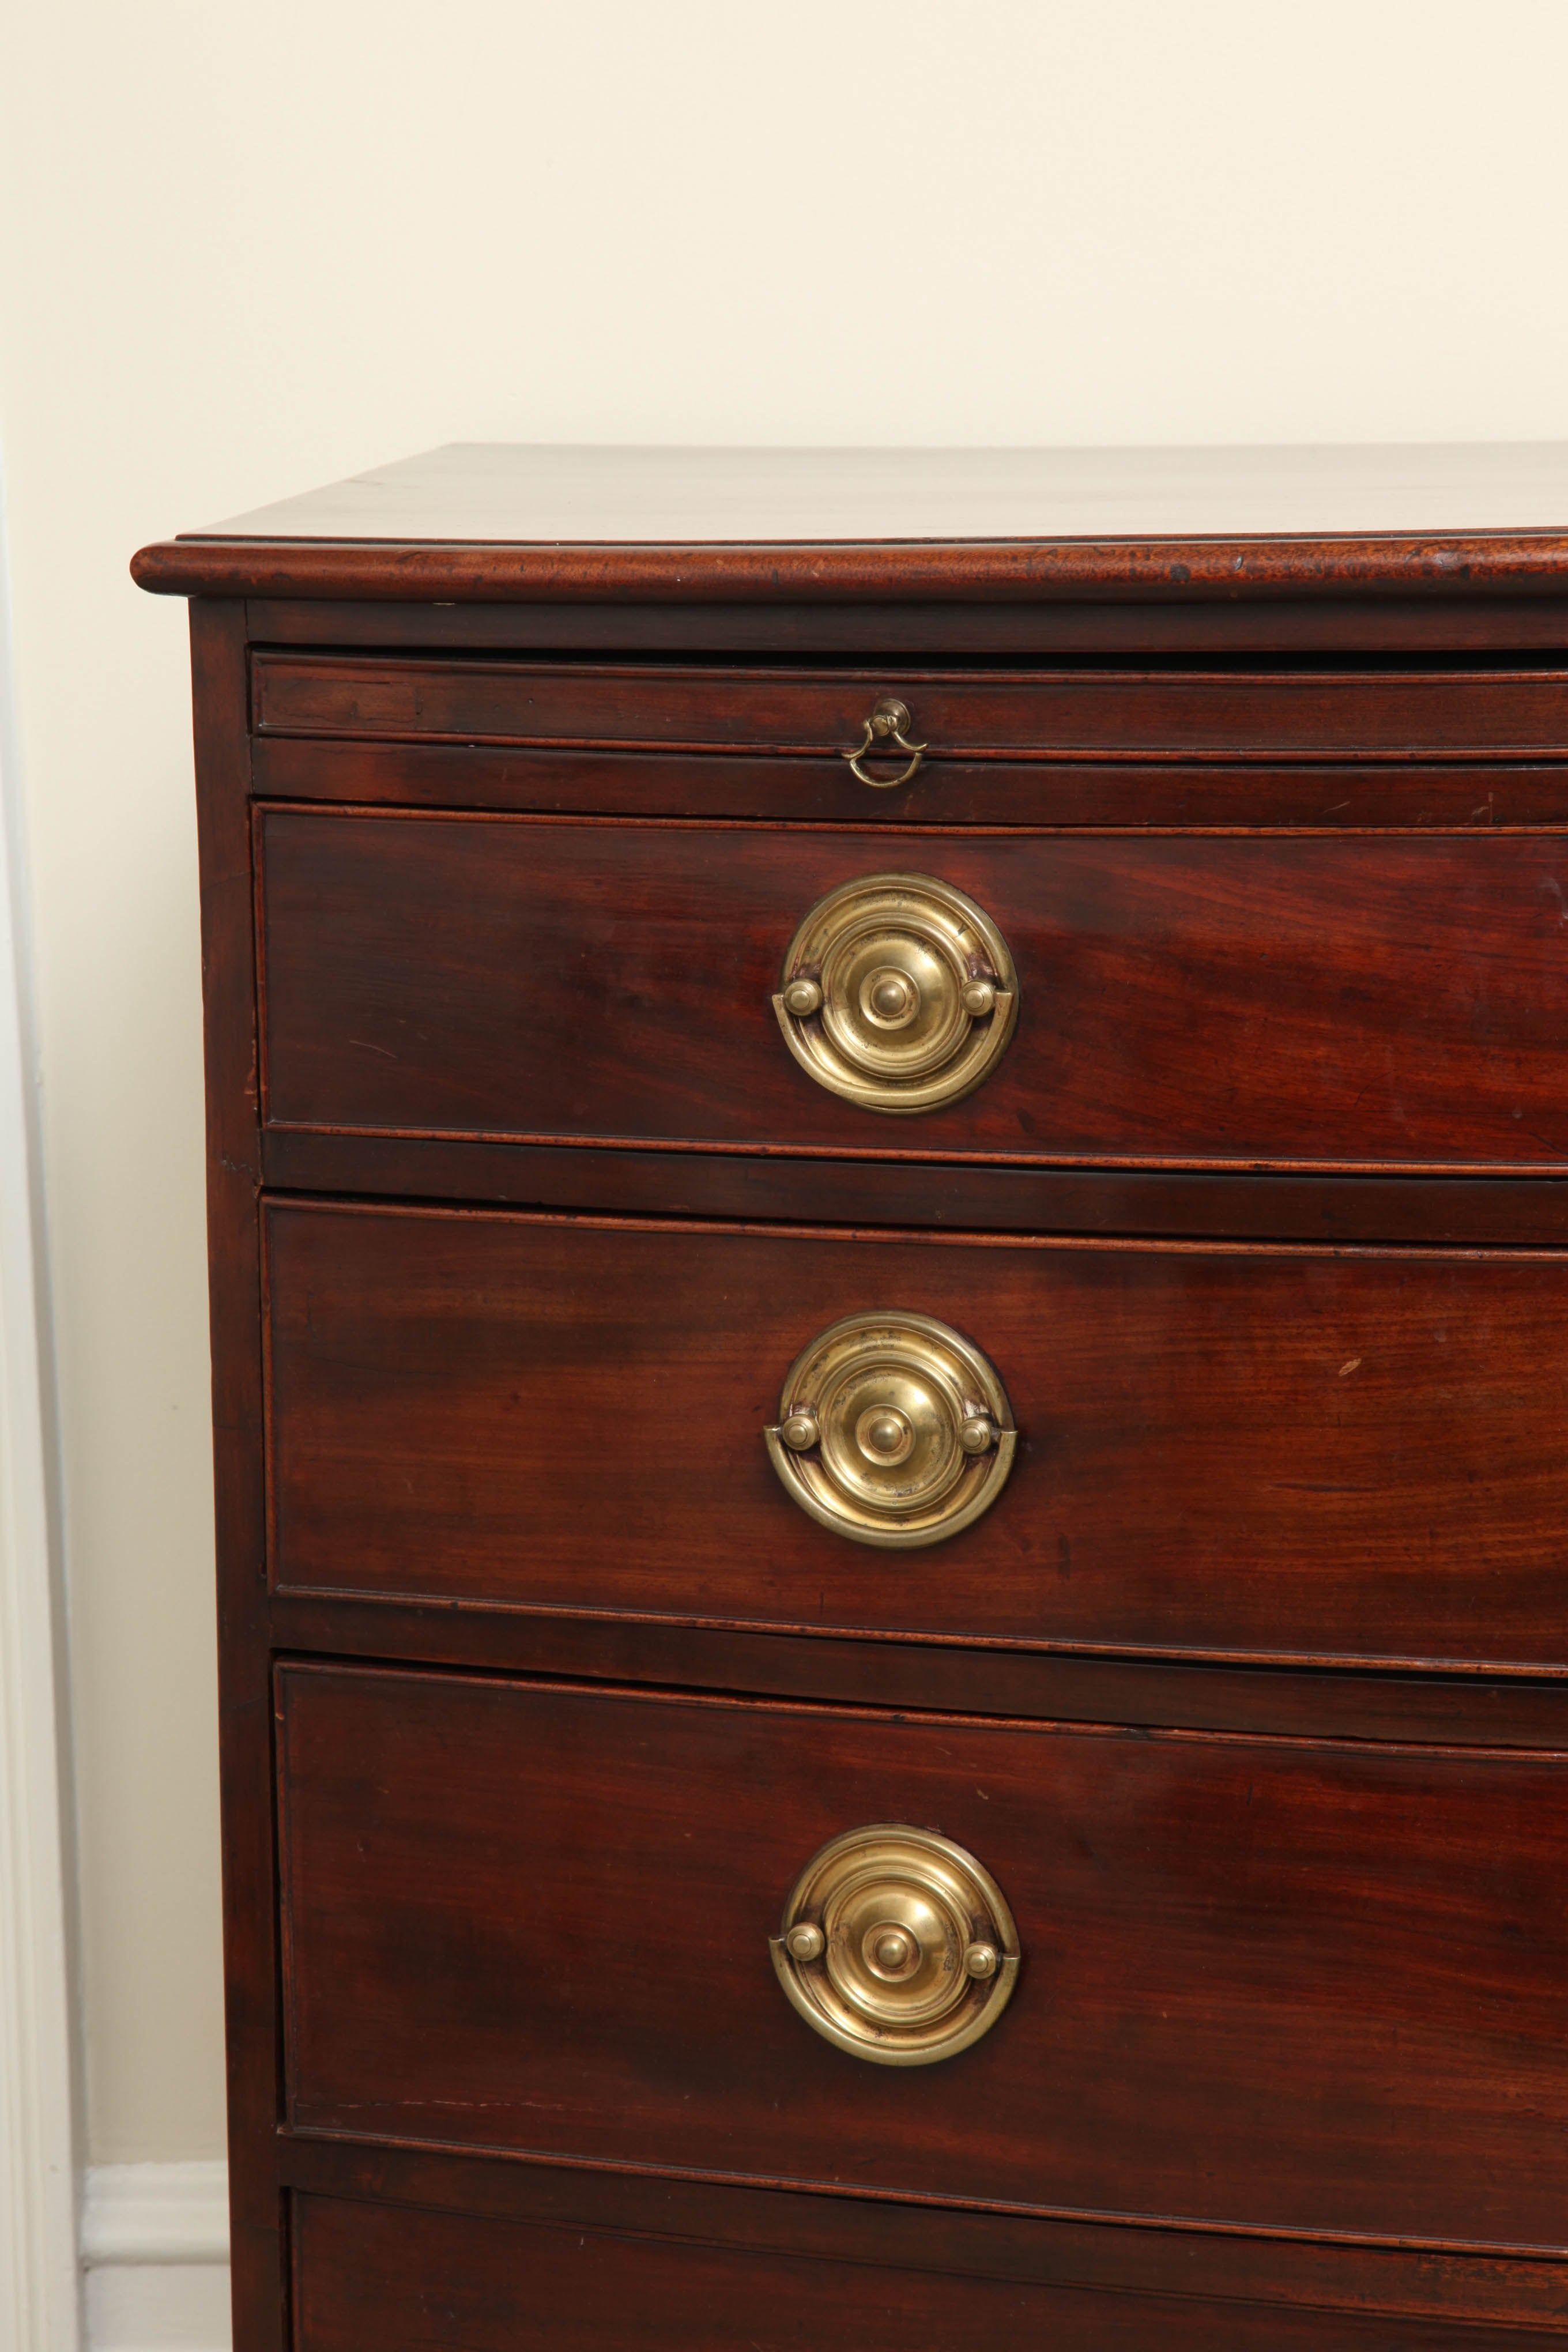 With deep rich color and lively figure; the fitted with a brushing slide over four graduated, cockbeaded drawers with brass pulls, above the scalloped apron and outswept feet.